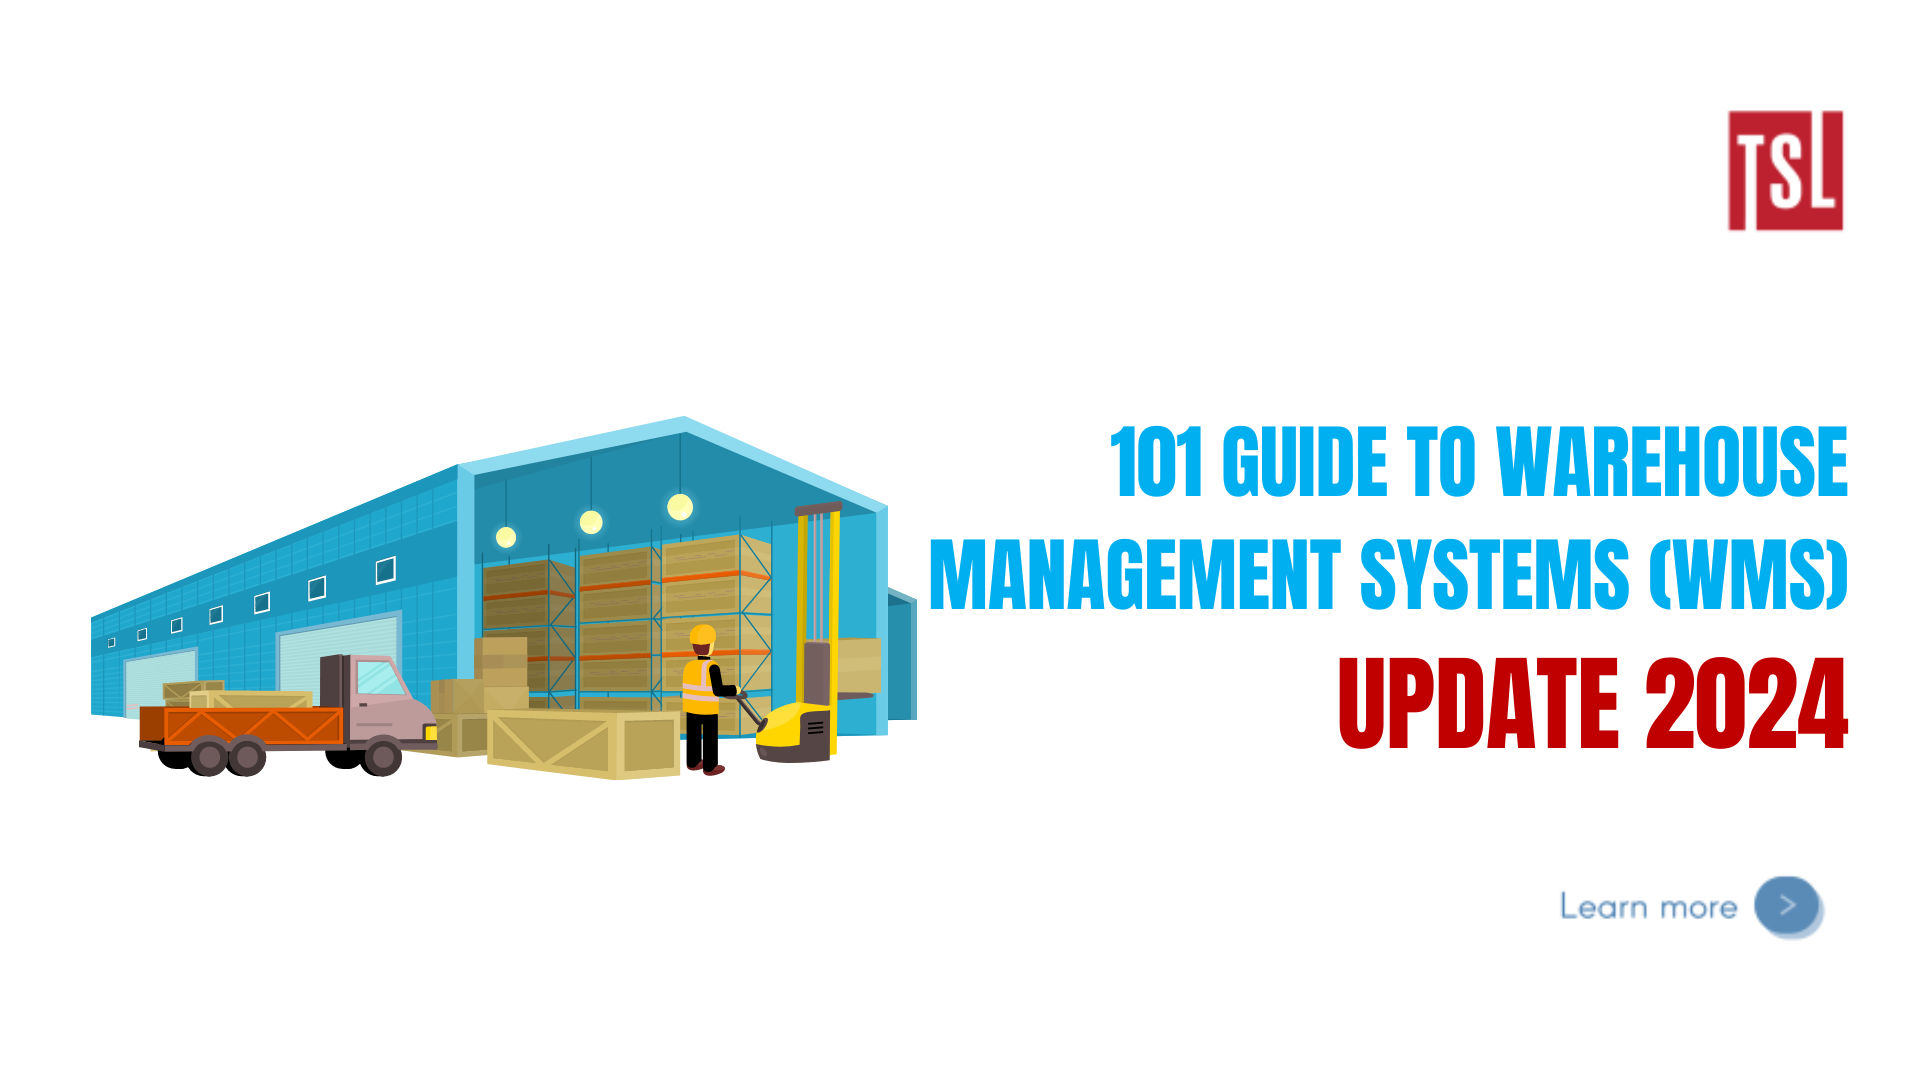 101 Guide to Warehouse Management Systems (WMS) – UPDATE 2024